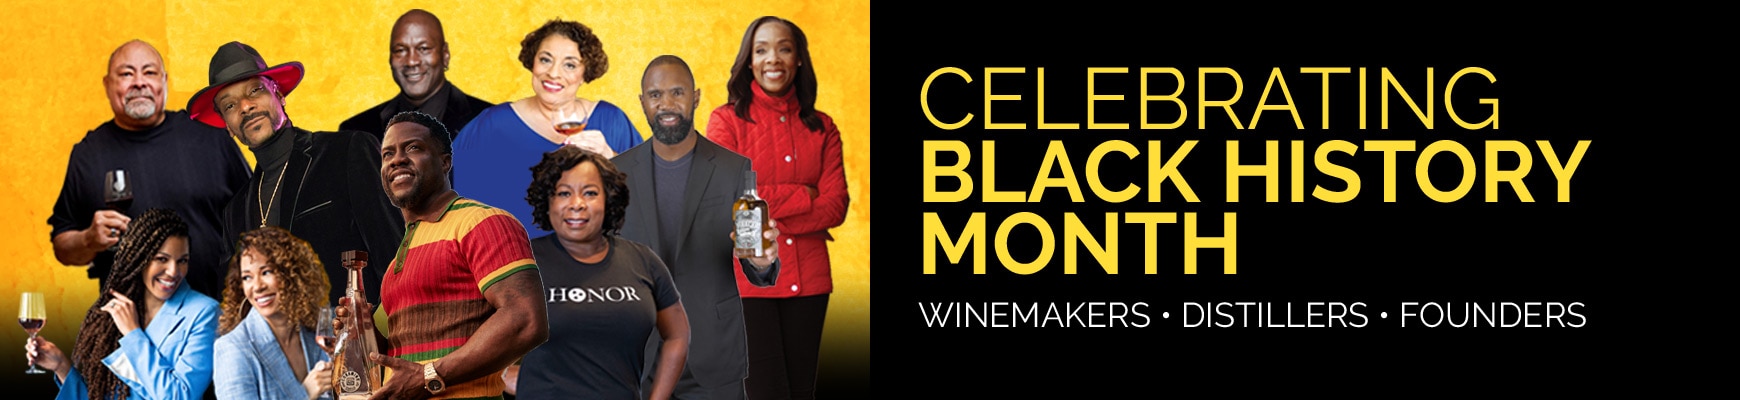 Celebrating Black History Month - Winemakers, Distillers, Owners